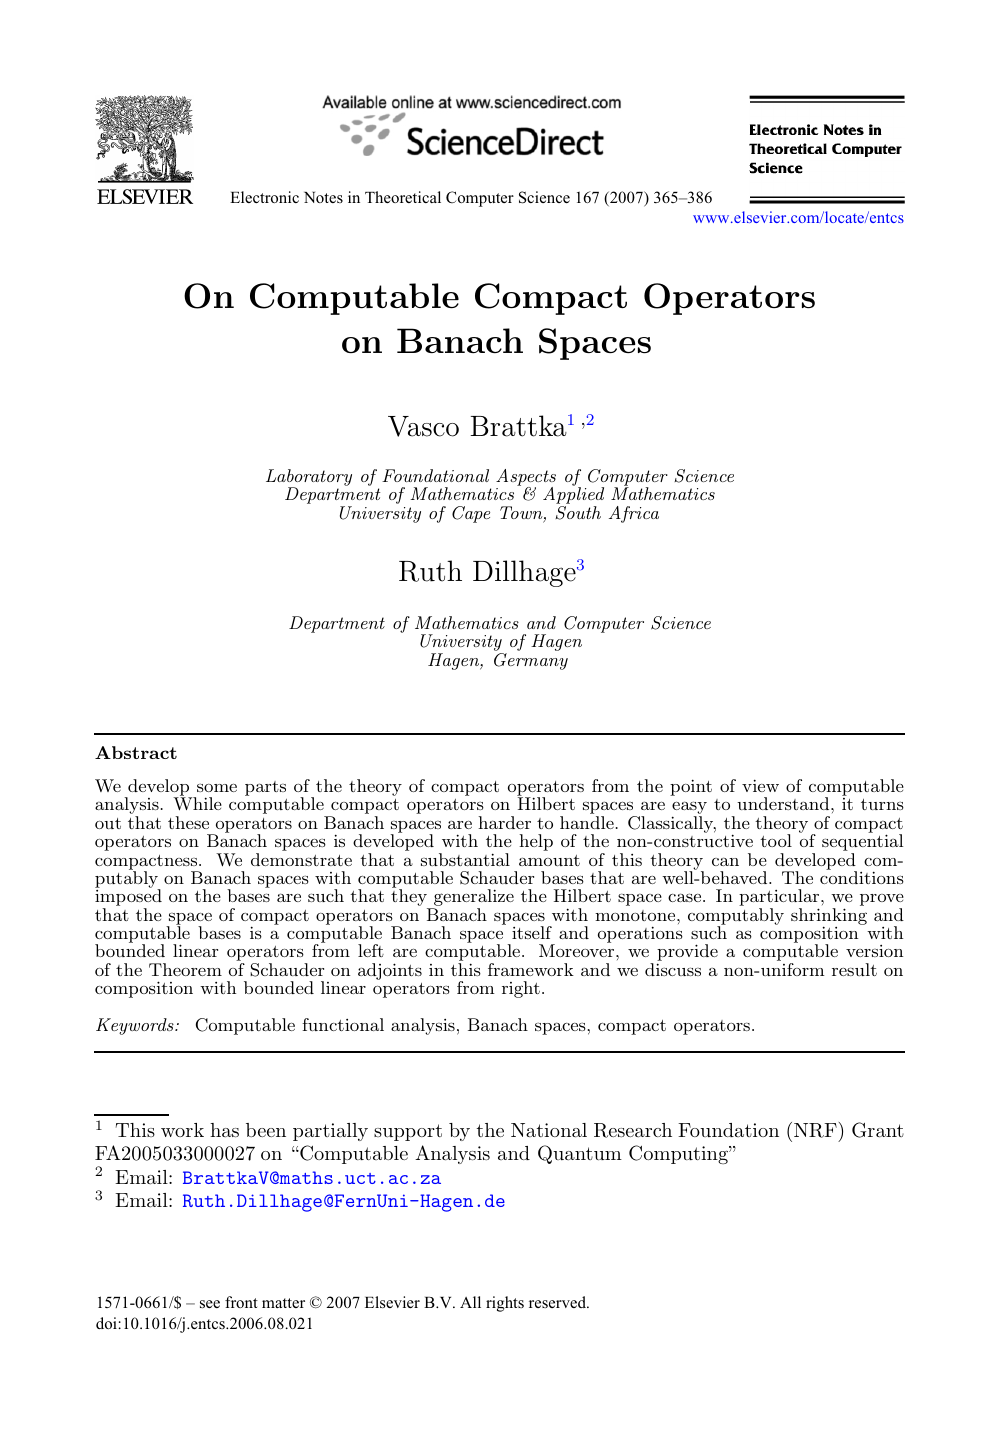 On Computable Compact Operators On Banach Spaces Topic Of Research Paper In Mathematics Download Scholarly Article Pdf And Read For Free On Cyberleninka Open Science Hub